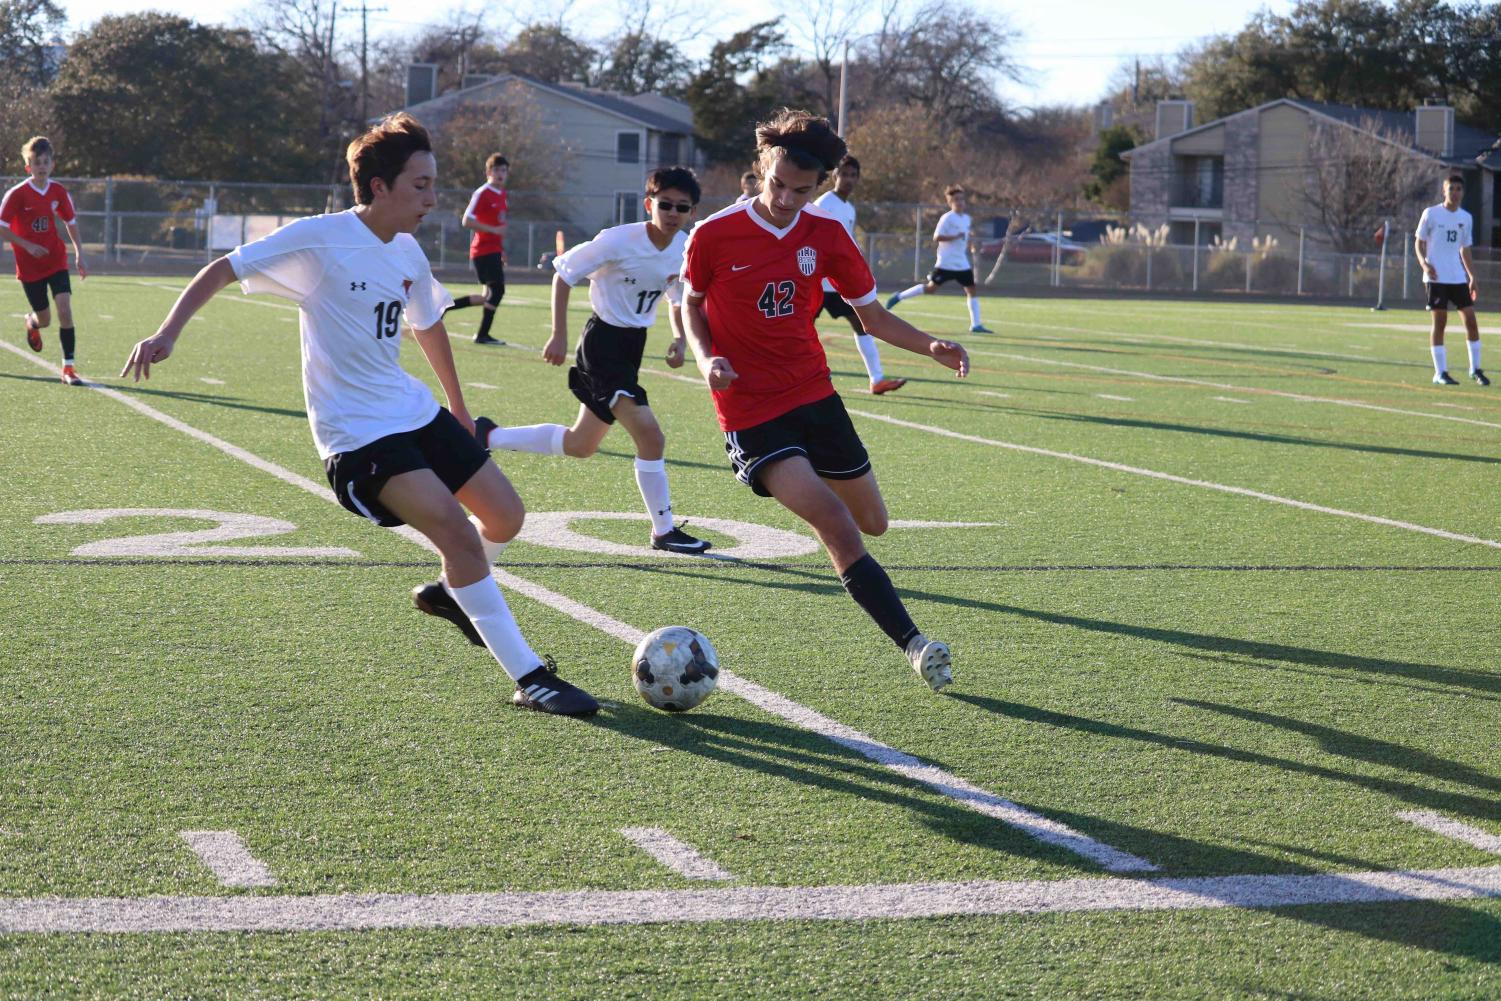 GALLERY%3A+JV+White+Boys+Soccer+Falls+to+Bowie+2-0